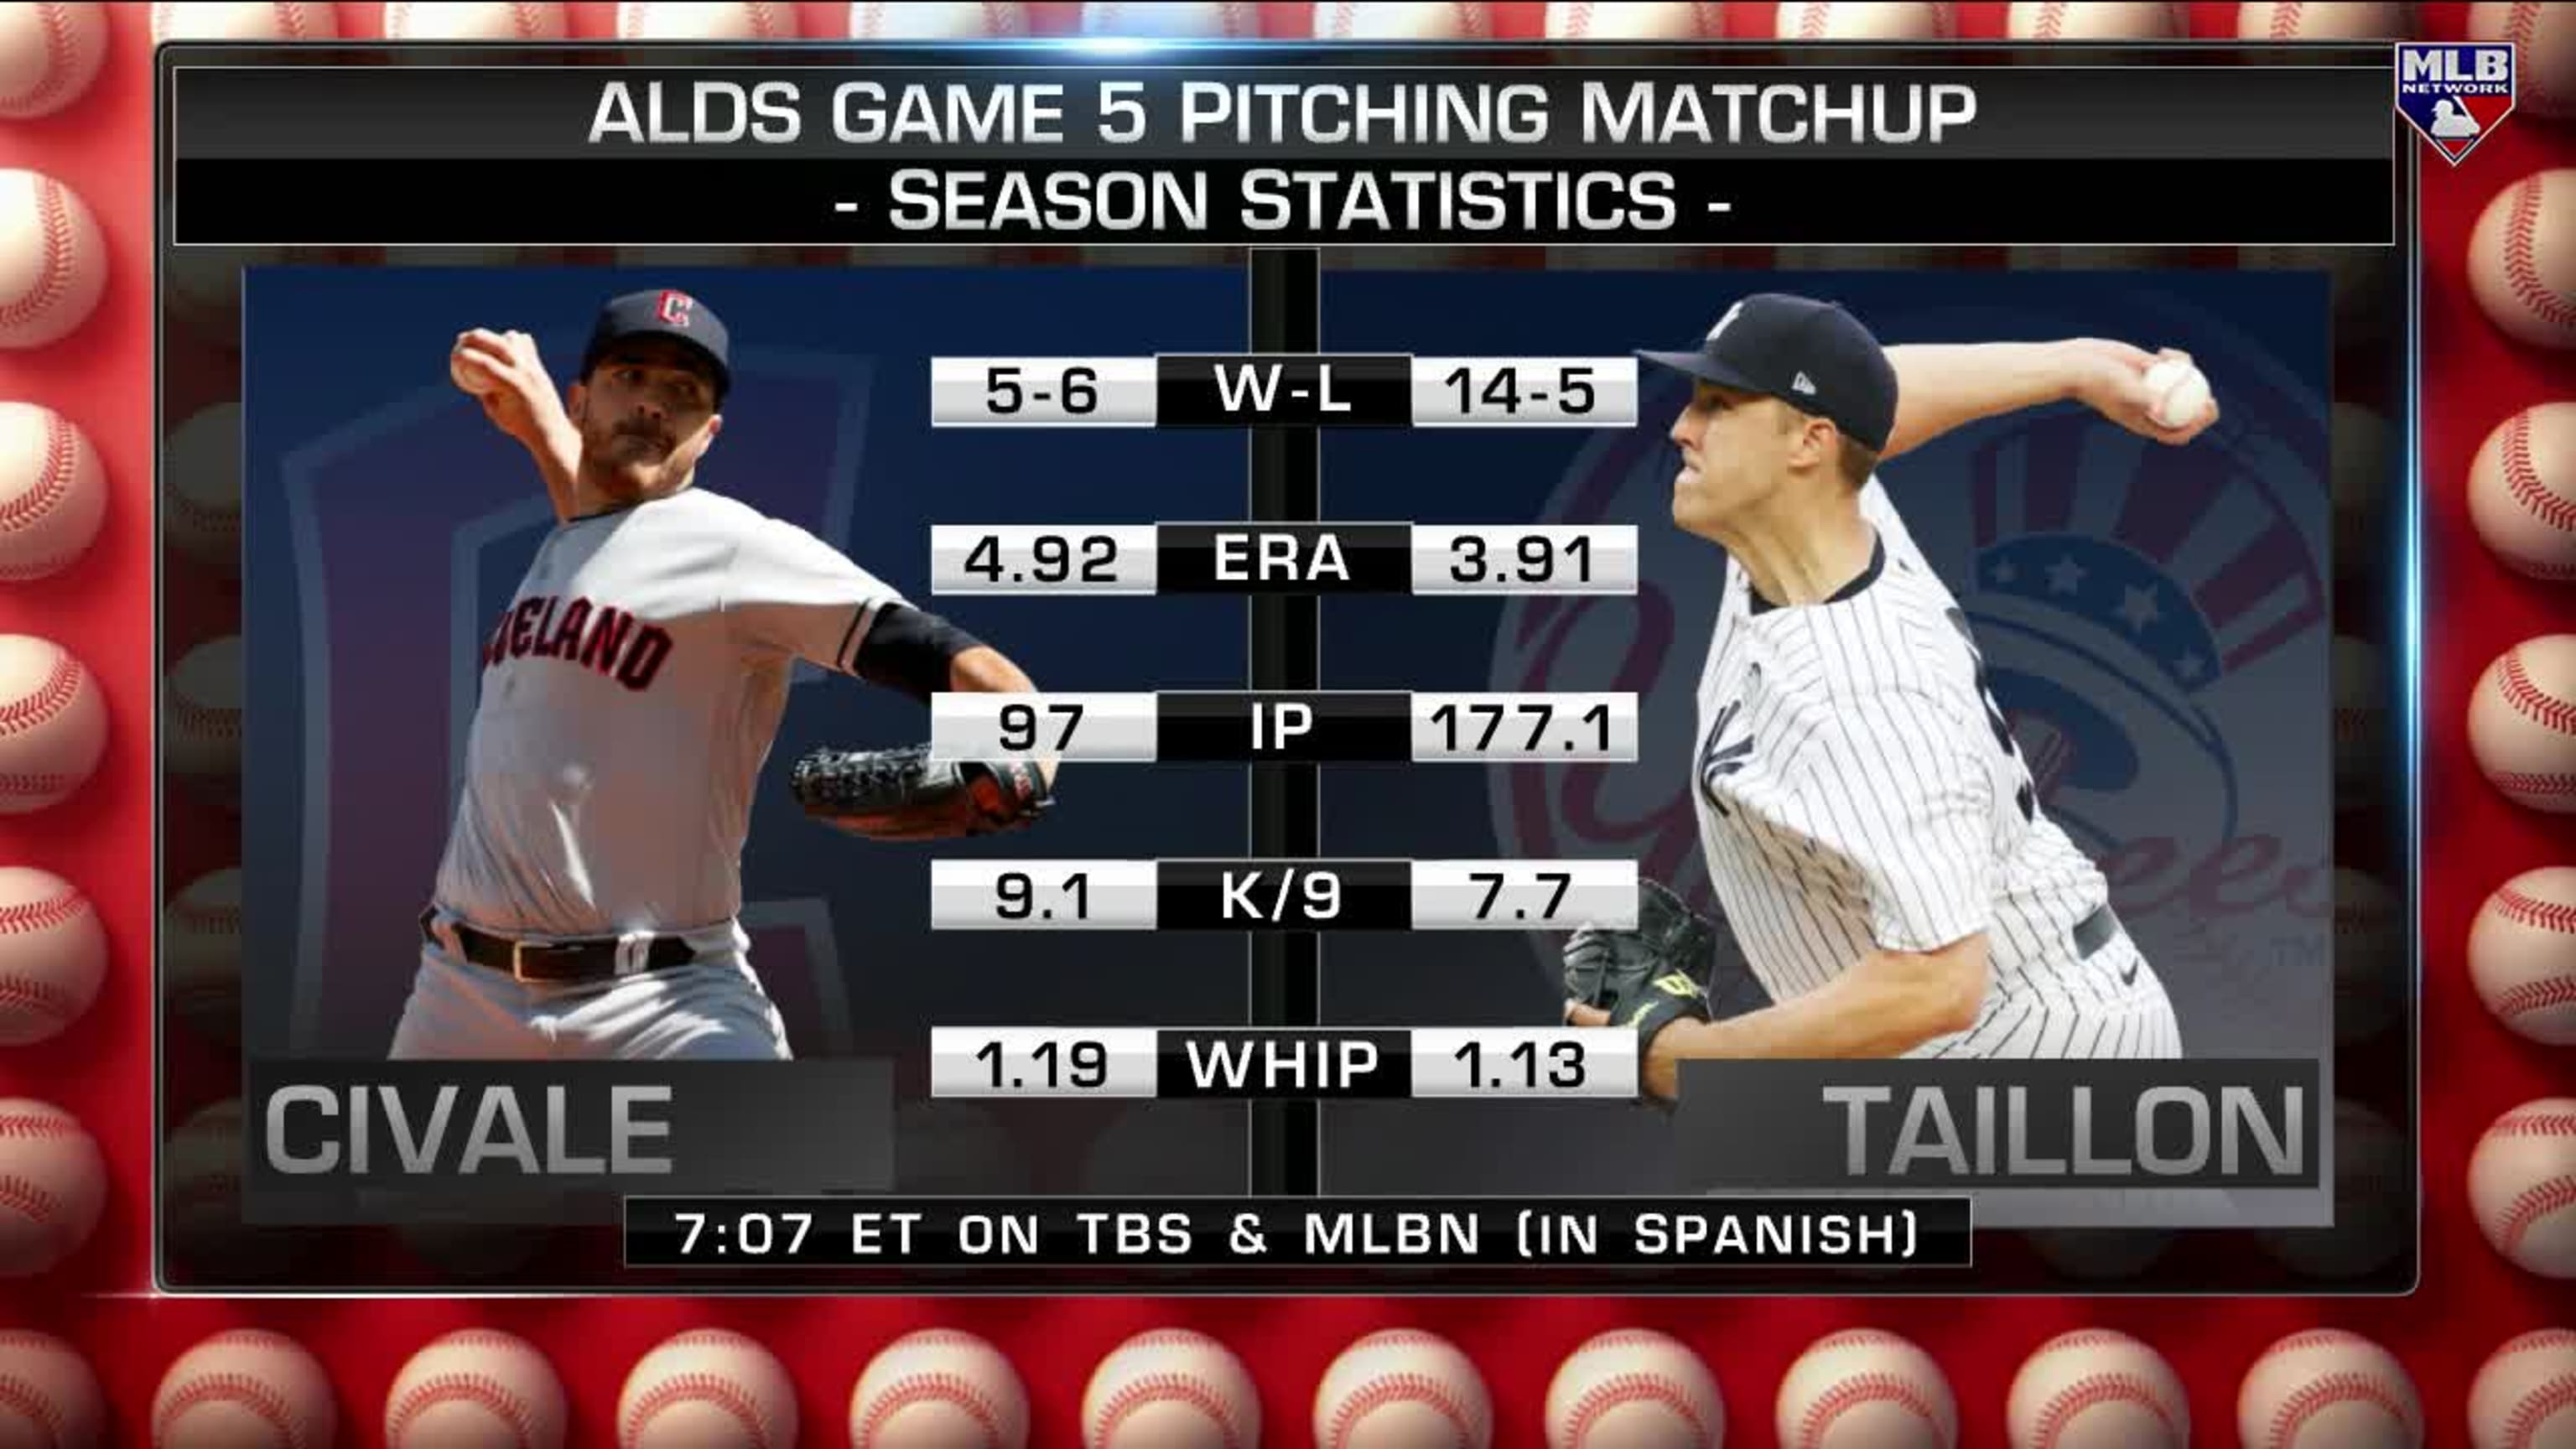 Previewing Game 5 of the ALDS